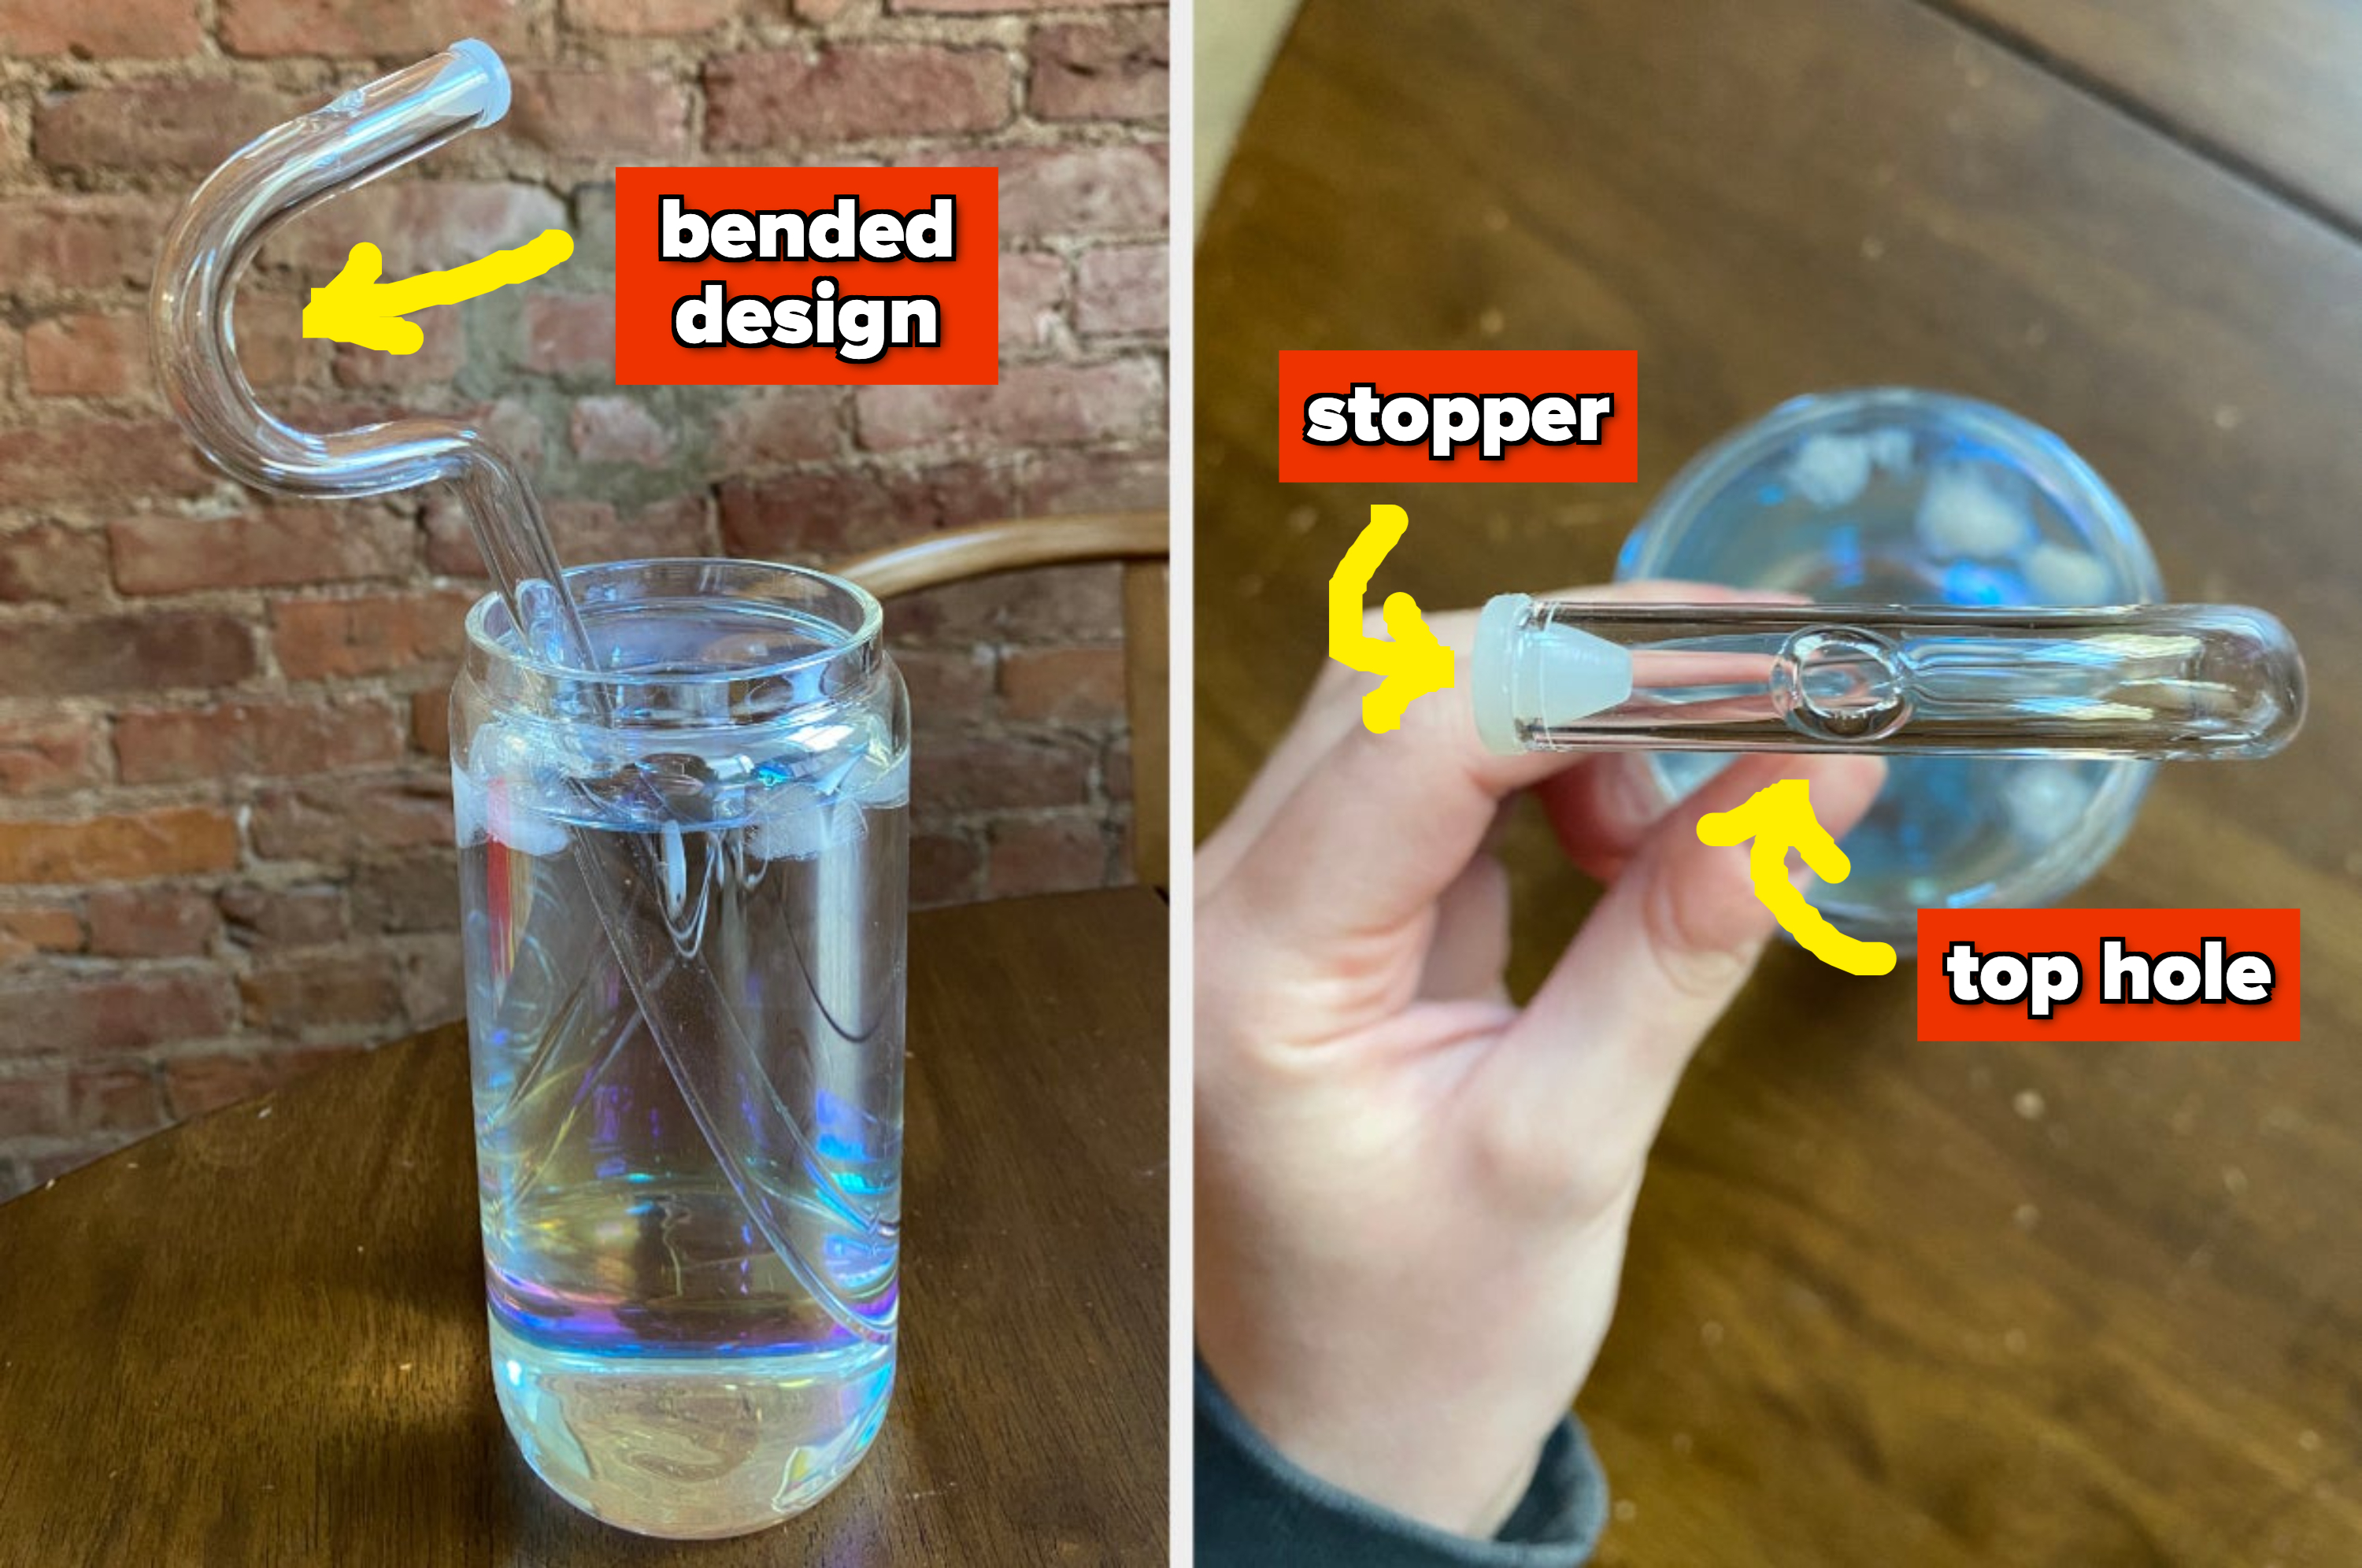 A glass anti-wrinkle straw with a bent design, stopper, and top hole, illustrated with labeled arrows